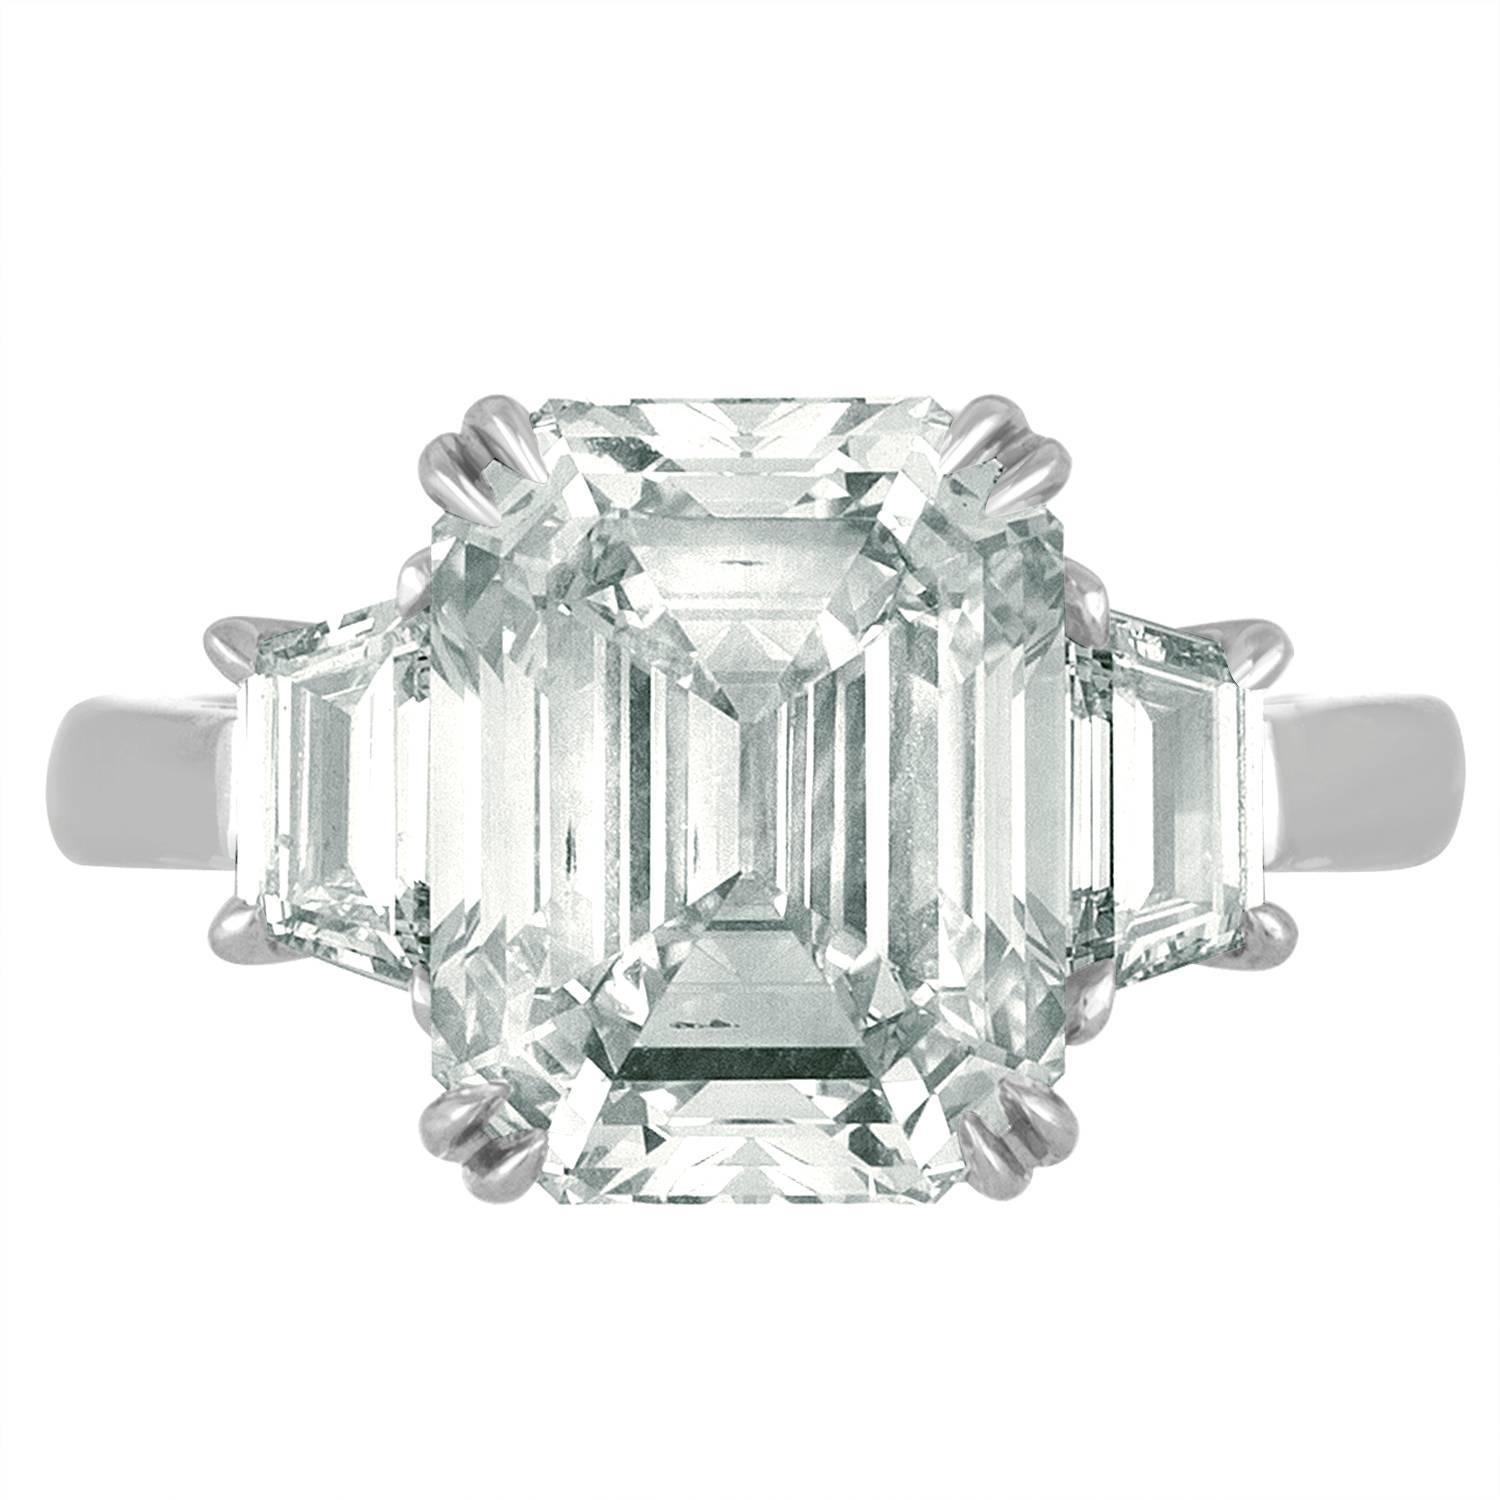 6.02 Carat Emerald cut Diamonds Certified by the GIA as I in Color and VS2 in Clarity.
The Center Stone is set with Two Step Cut Trapezoids to match the Emerald Cut Diamond. The Trapezoids are 0.58 Carats Total Weight.
Three Matching Diamonds are